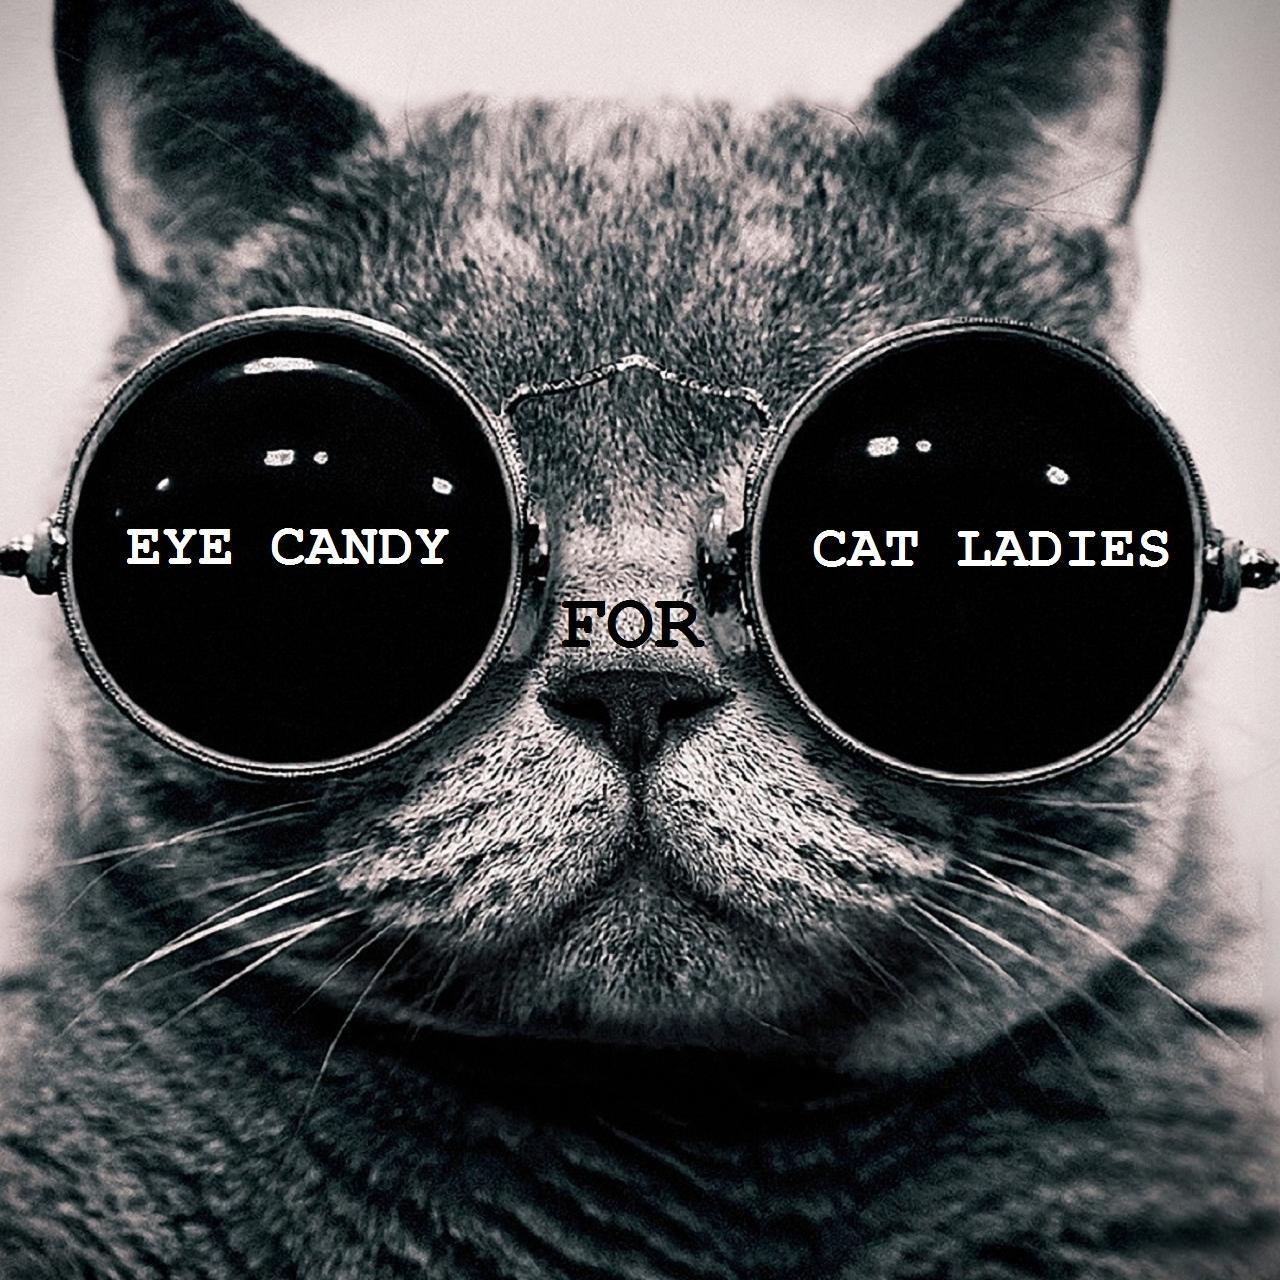 Cats and Memes • Comfy Sweaters, Galaxy #Cats, #Yarn.. Official Twitter for parody cat content #YouTube channel: 'Eye Candy for Cat Ladies' • ♡